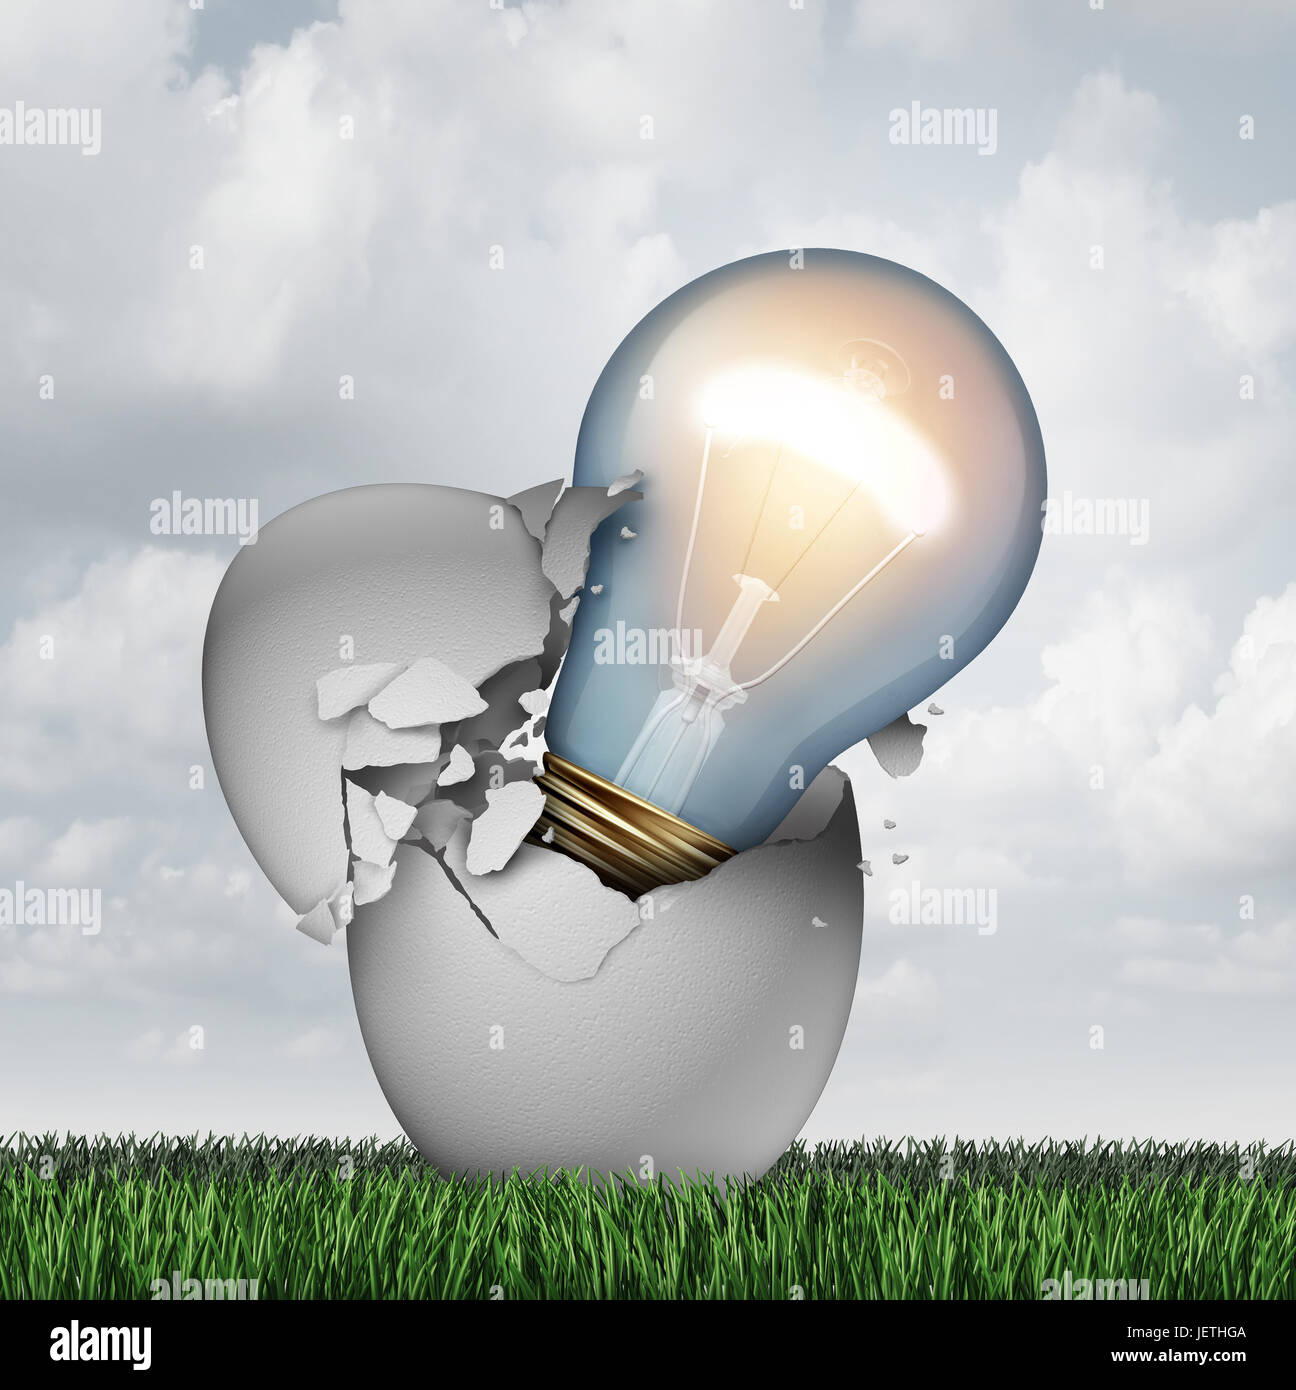 Idea birth concept and out of the box brainstorming symbol as a hatching egg with a lightbulb emerging as an icon for startup and entrepreneur. Stock Photo